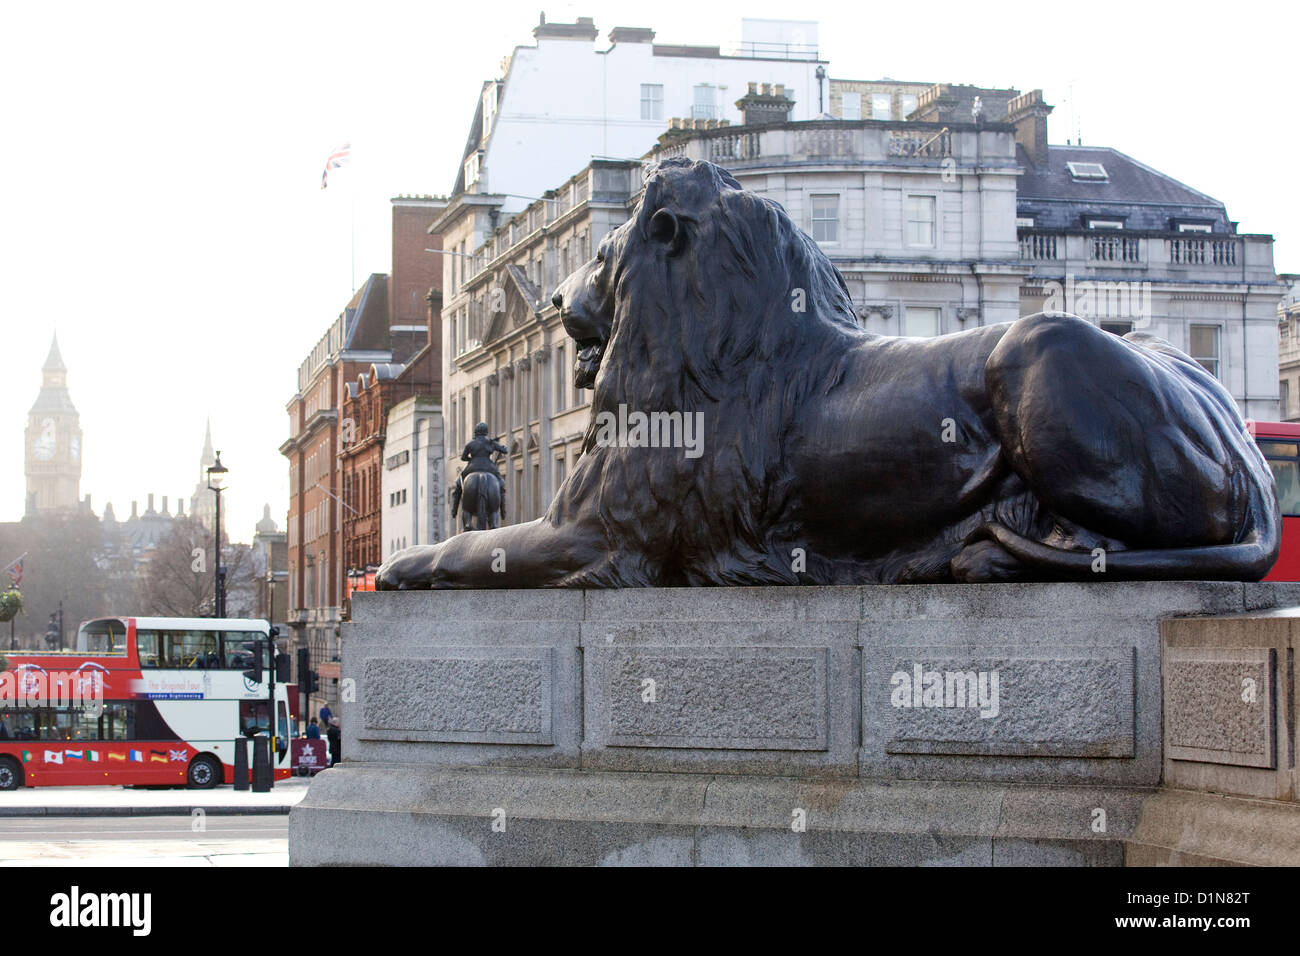 One of the four famous Lions at Trafalgar square London England Stock Photo